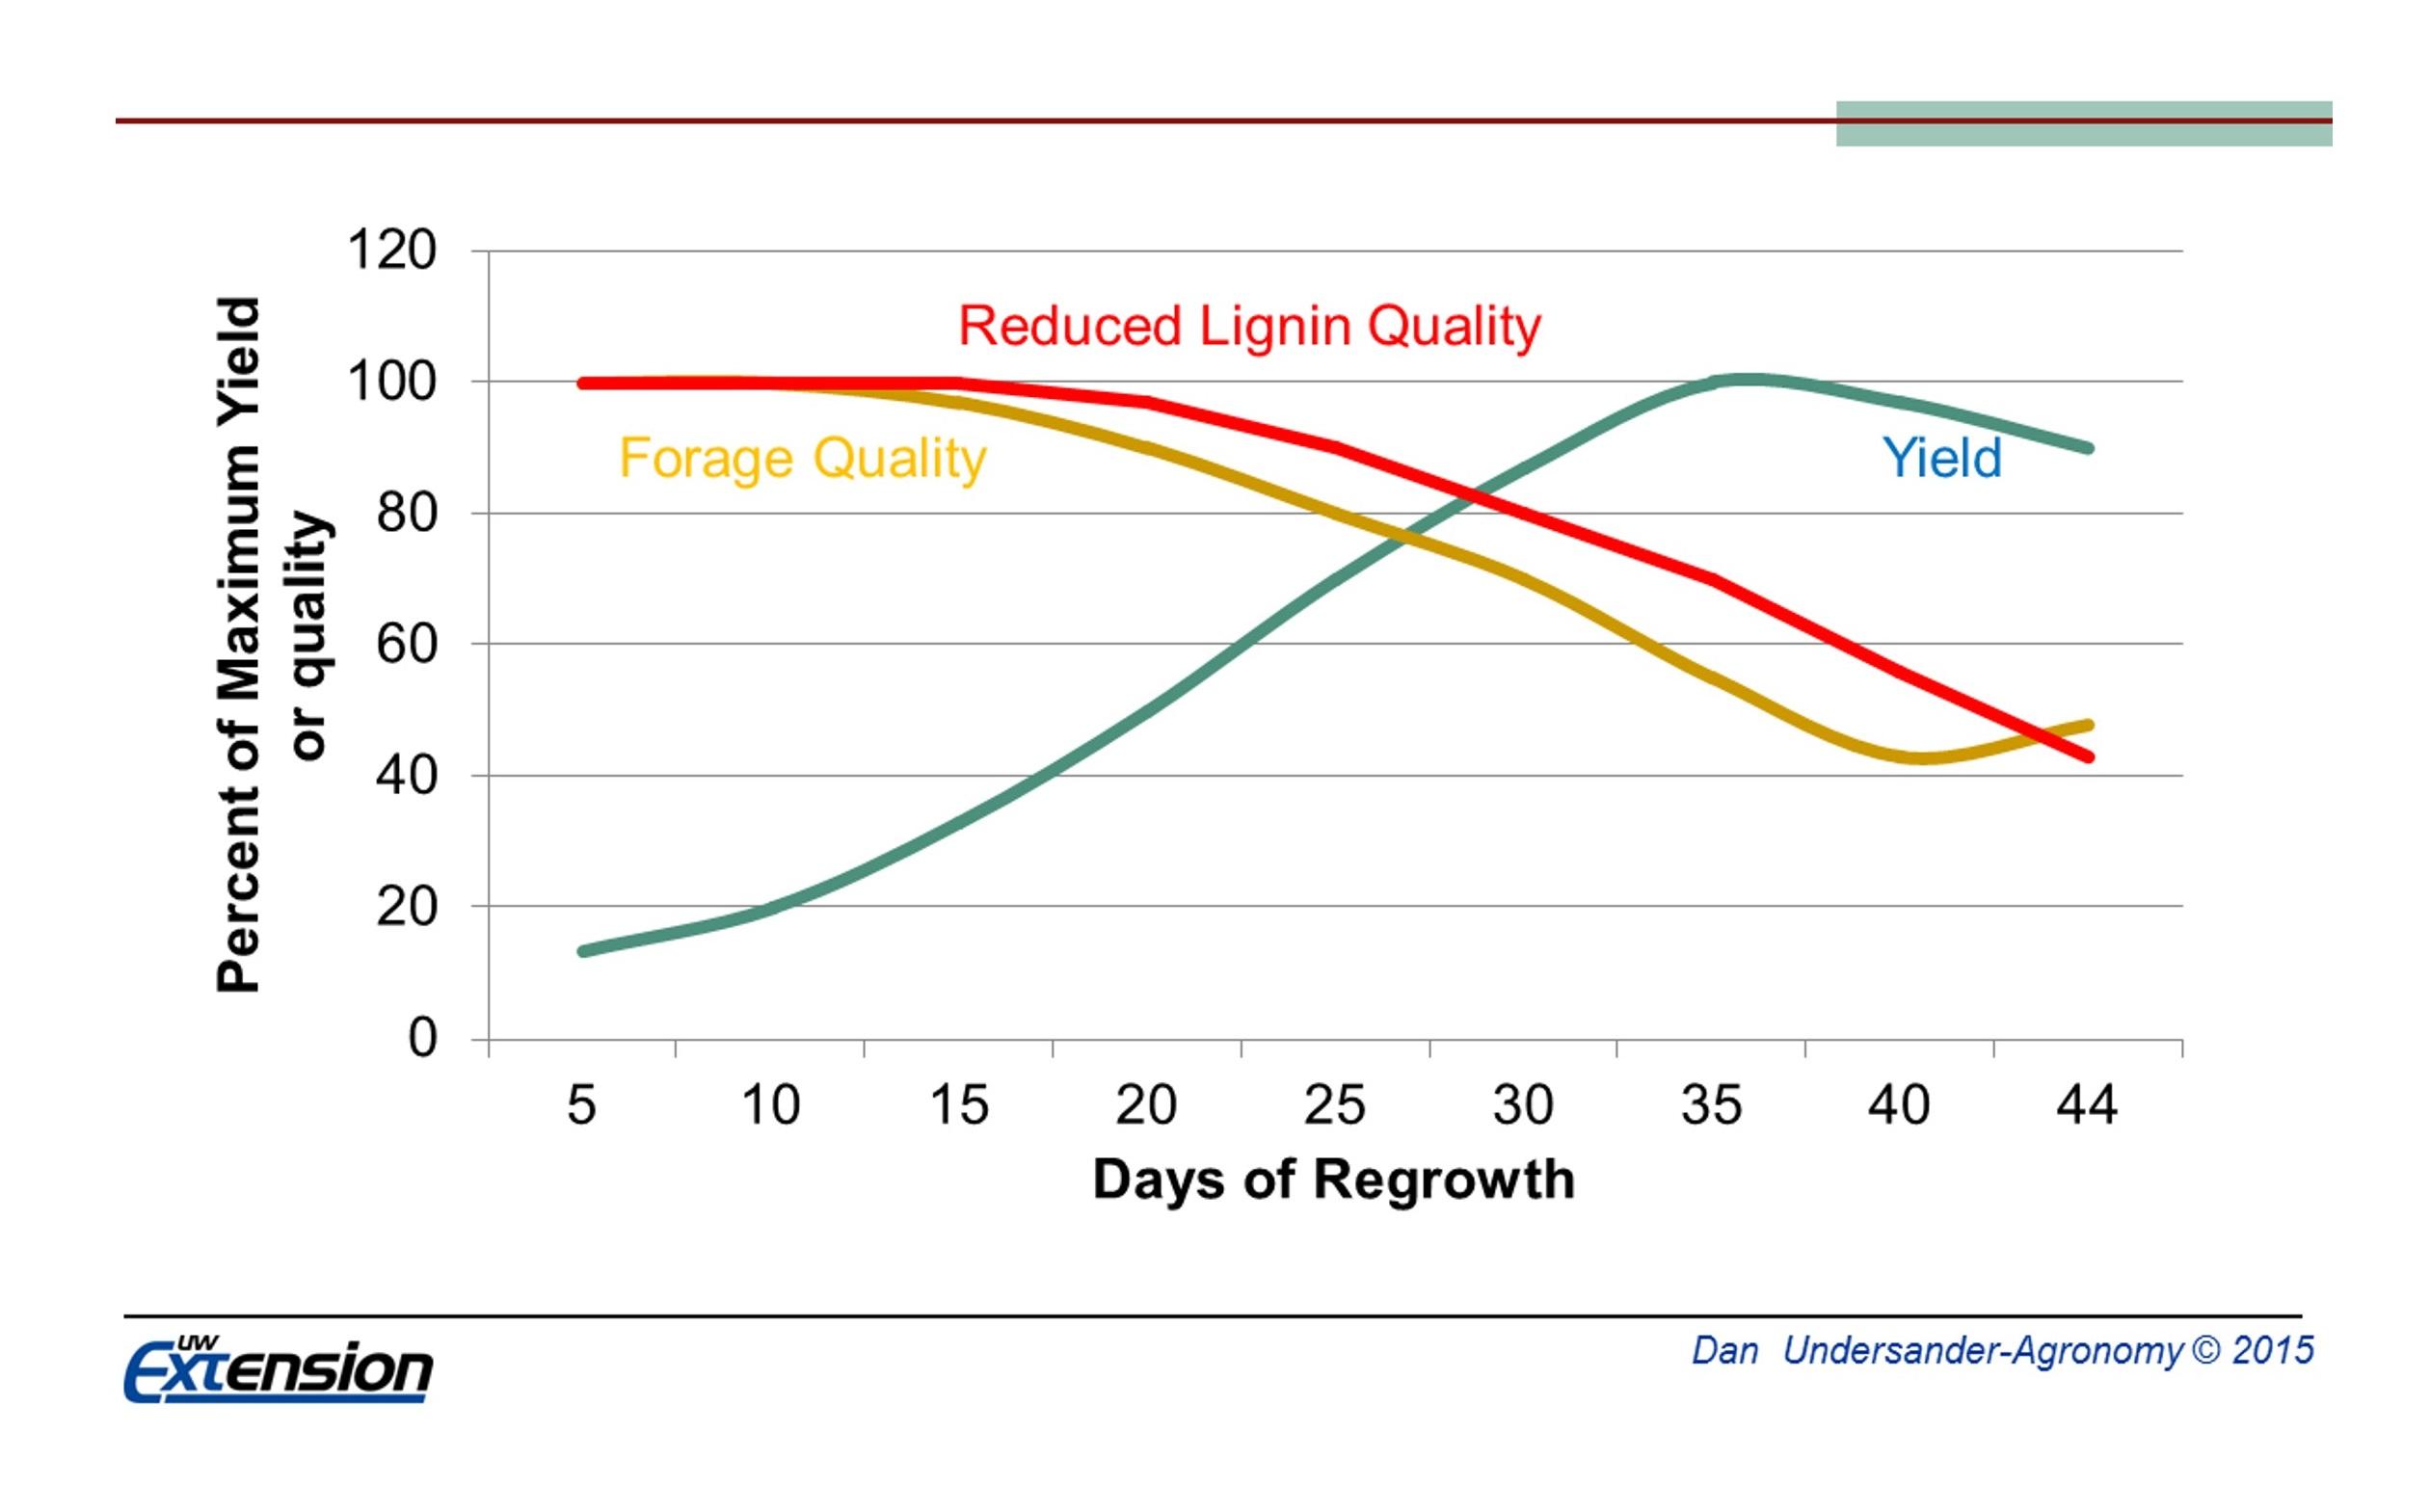 Figure 4. Reduced lignin alfalfa varieties allow a wider harvest window, because quality decreases less with maturity in comparison with conventional varieties. 